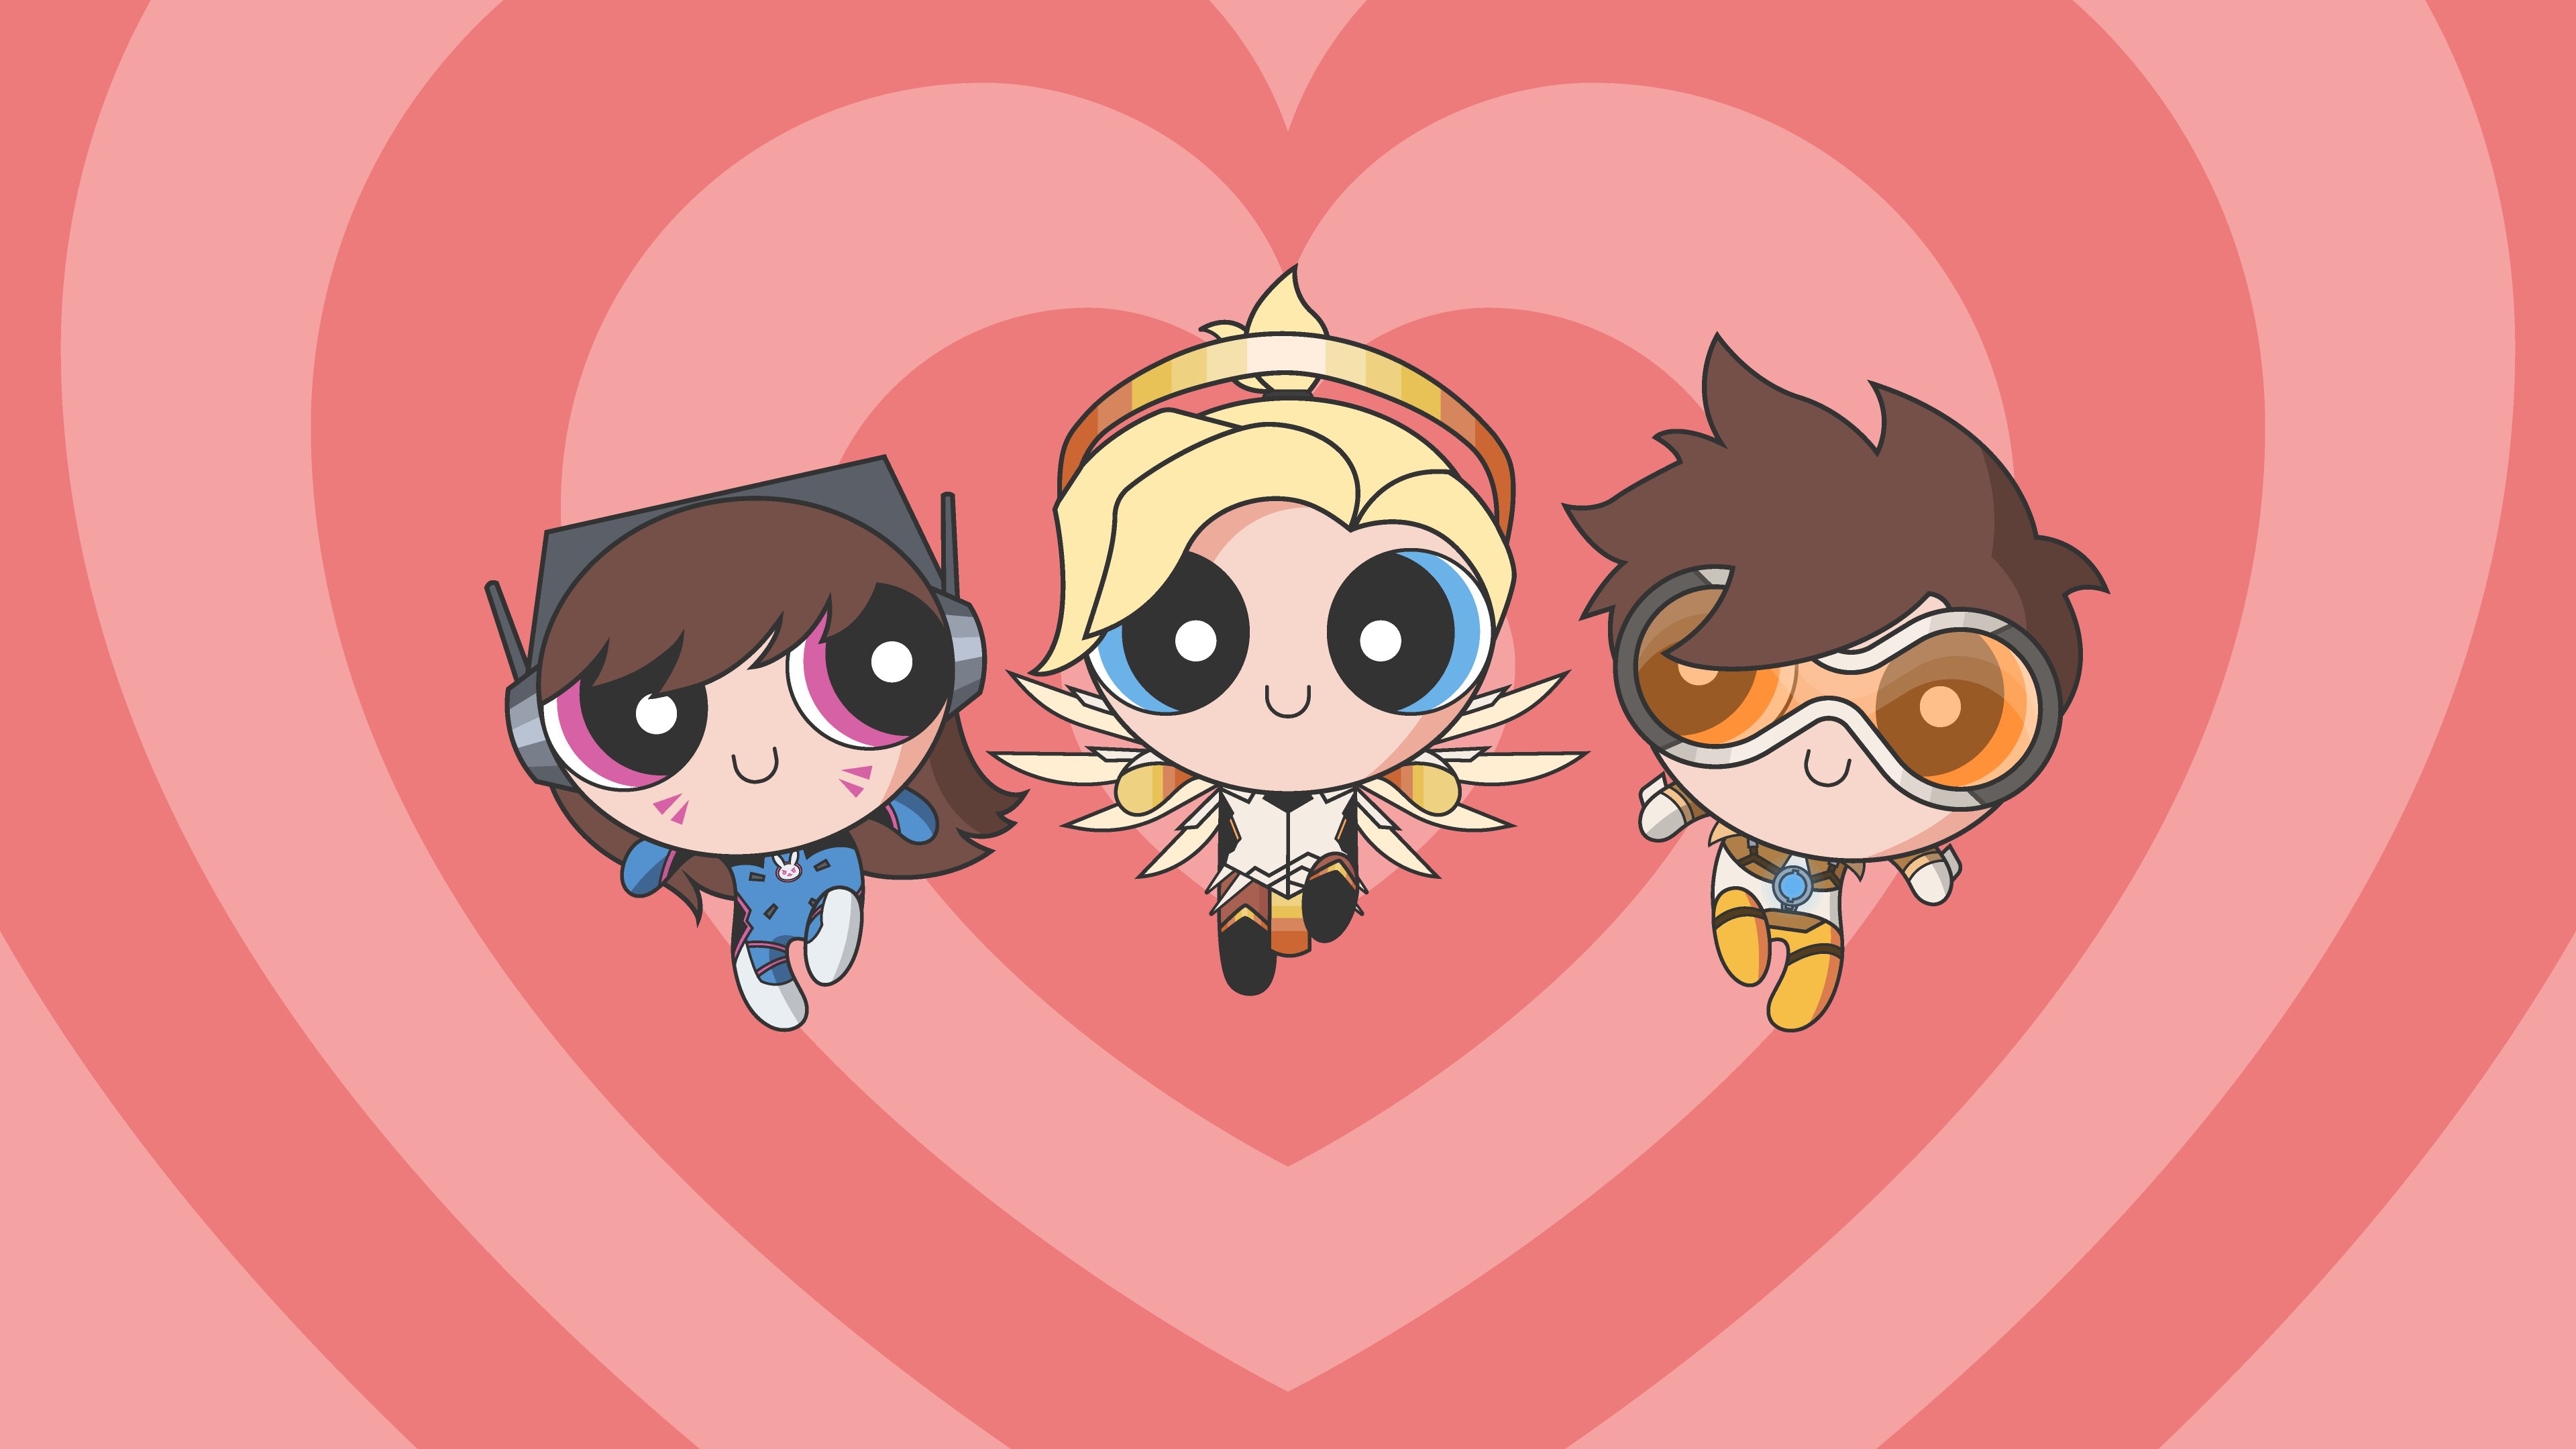 The Powerpuff Girls Blossom In Dark Pink Background HD Anime Wallpapers   HD Wallpapers  ID 38308